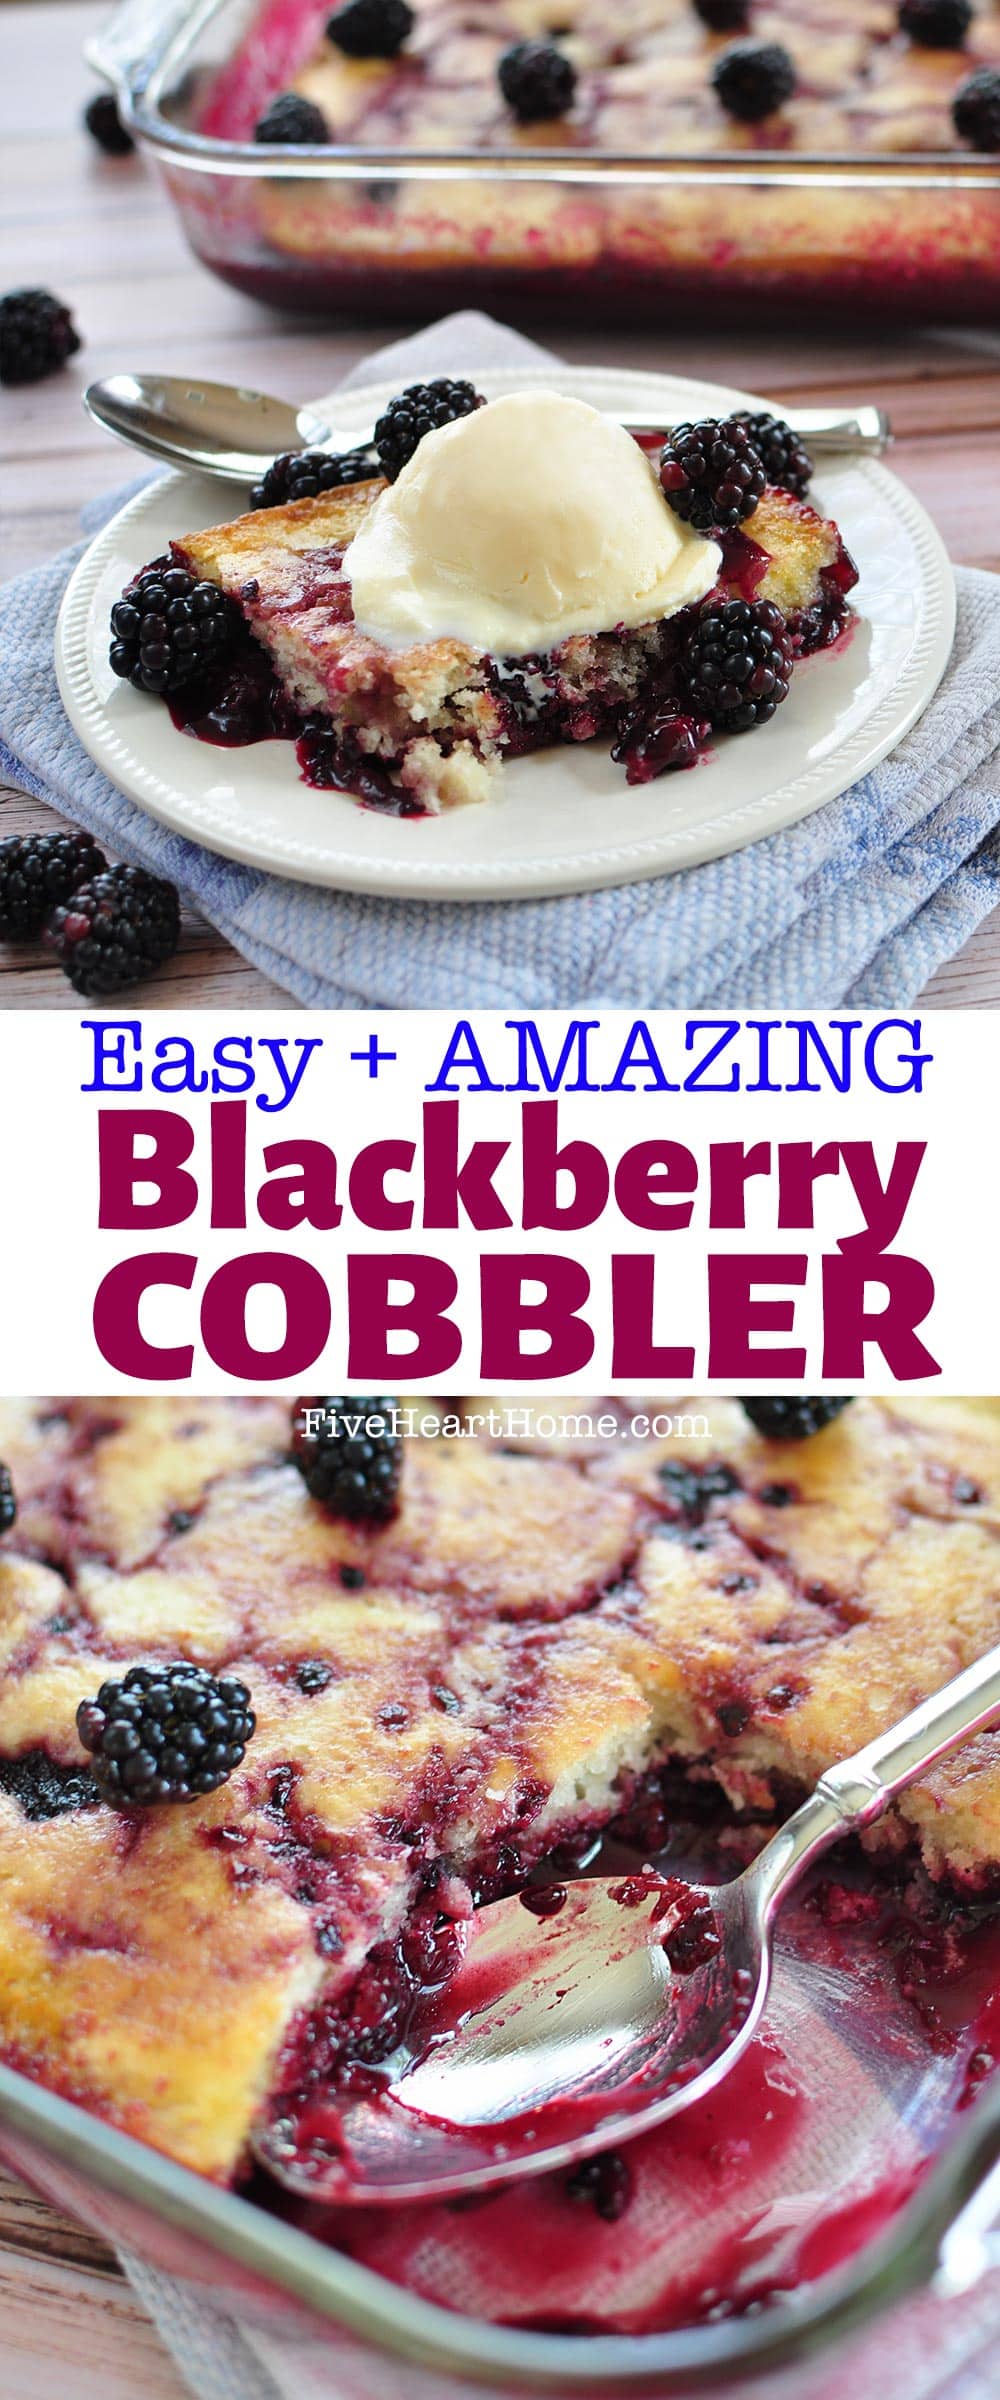 Easy Blackberry Cobbler ~ this from-scratch, scrumptious summer dessert recipe features plump, tart blackberries ribboned through a layer of sweet, tender cake! | FiveHeartHome.com via @fivehearthome